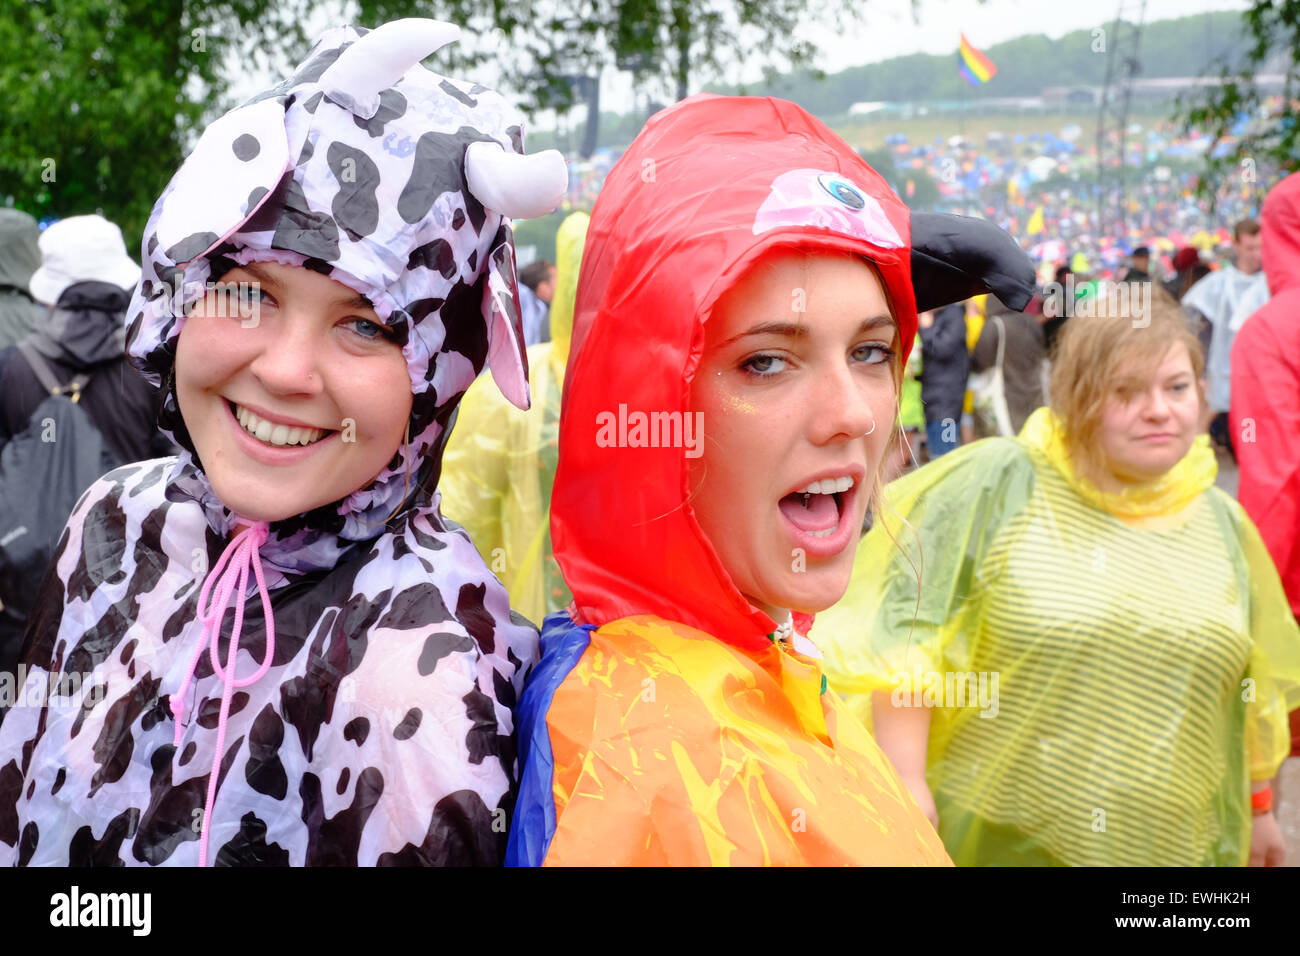 Glastonbury Festival, Somerset, UK. 26 June 2015. It would not be Glastonbury without some rain! Spirits stay high and the music continues despite a heavy mid afternoon downpour. Credit:  Tom Corban/Alamy Live News Stock Photo